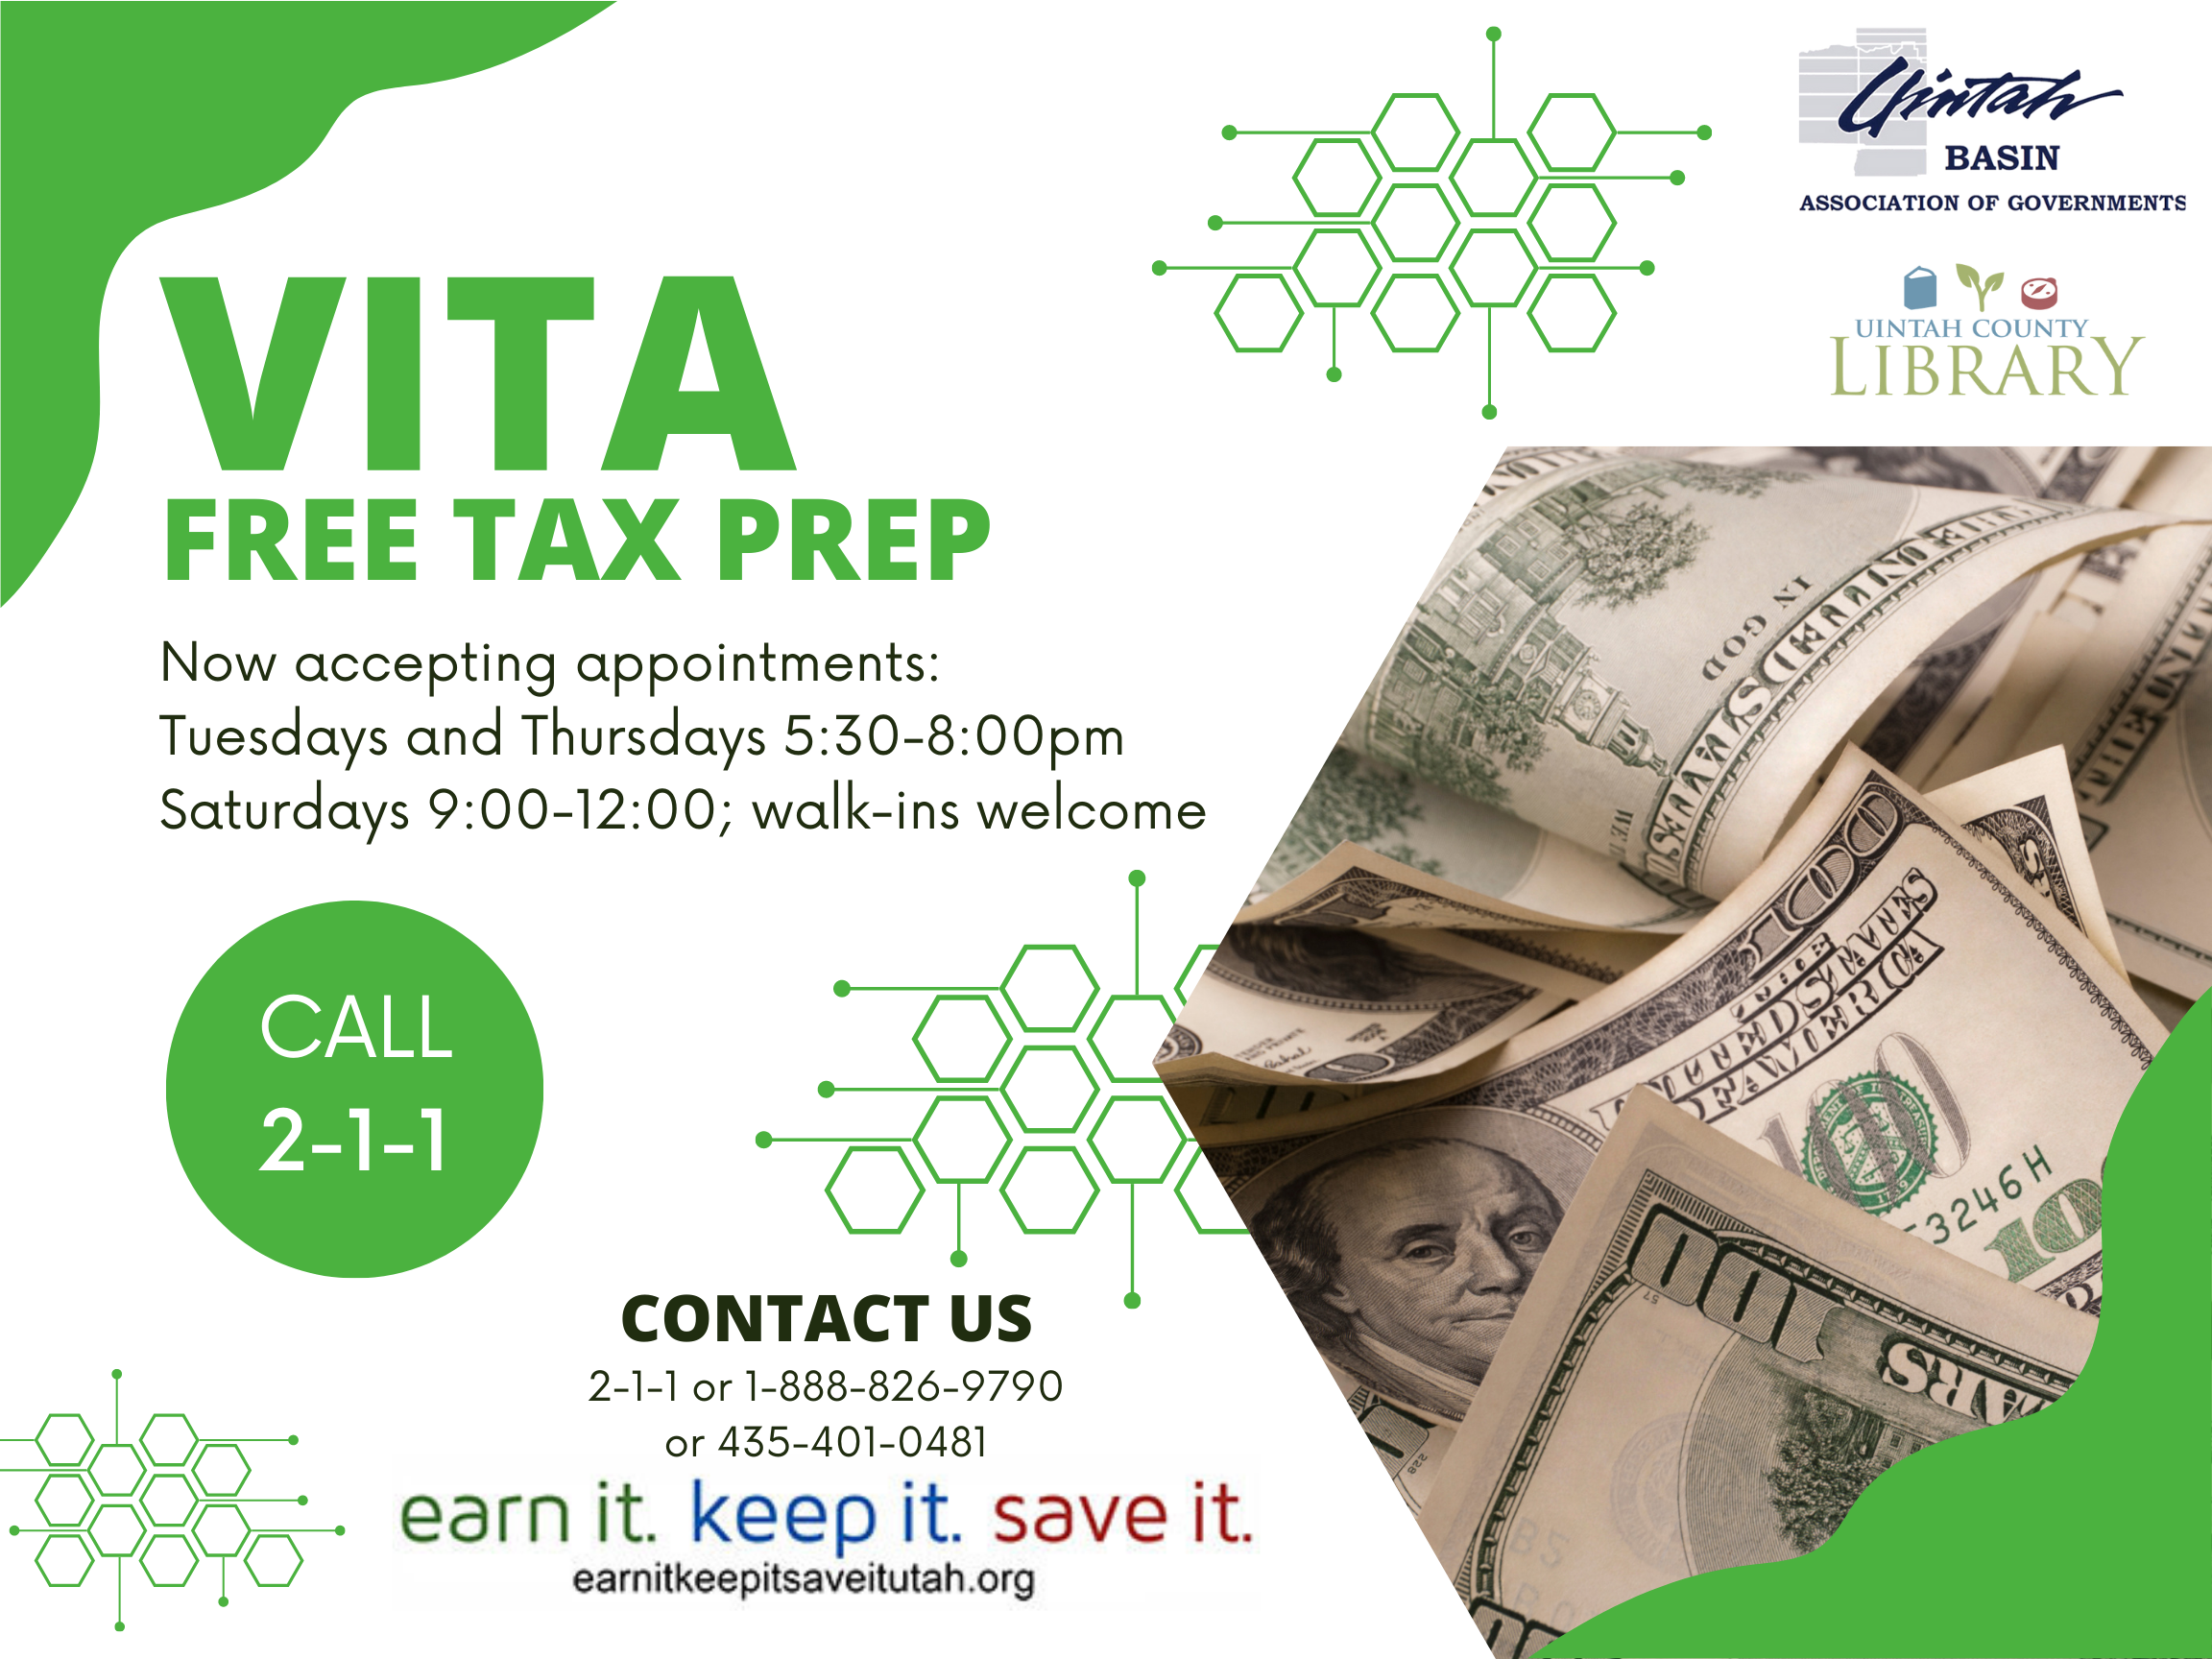 "VITA Free Tax Prep | Now accepting appointments: Tuesdays and Thursdays 5:30-8:00pm Saturdays 9:00-12:00; walk-ins welcome"